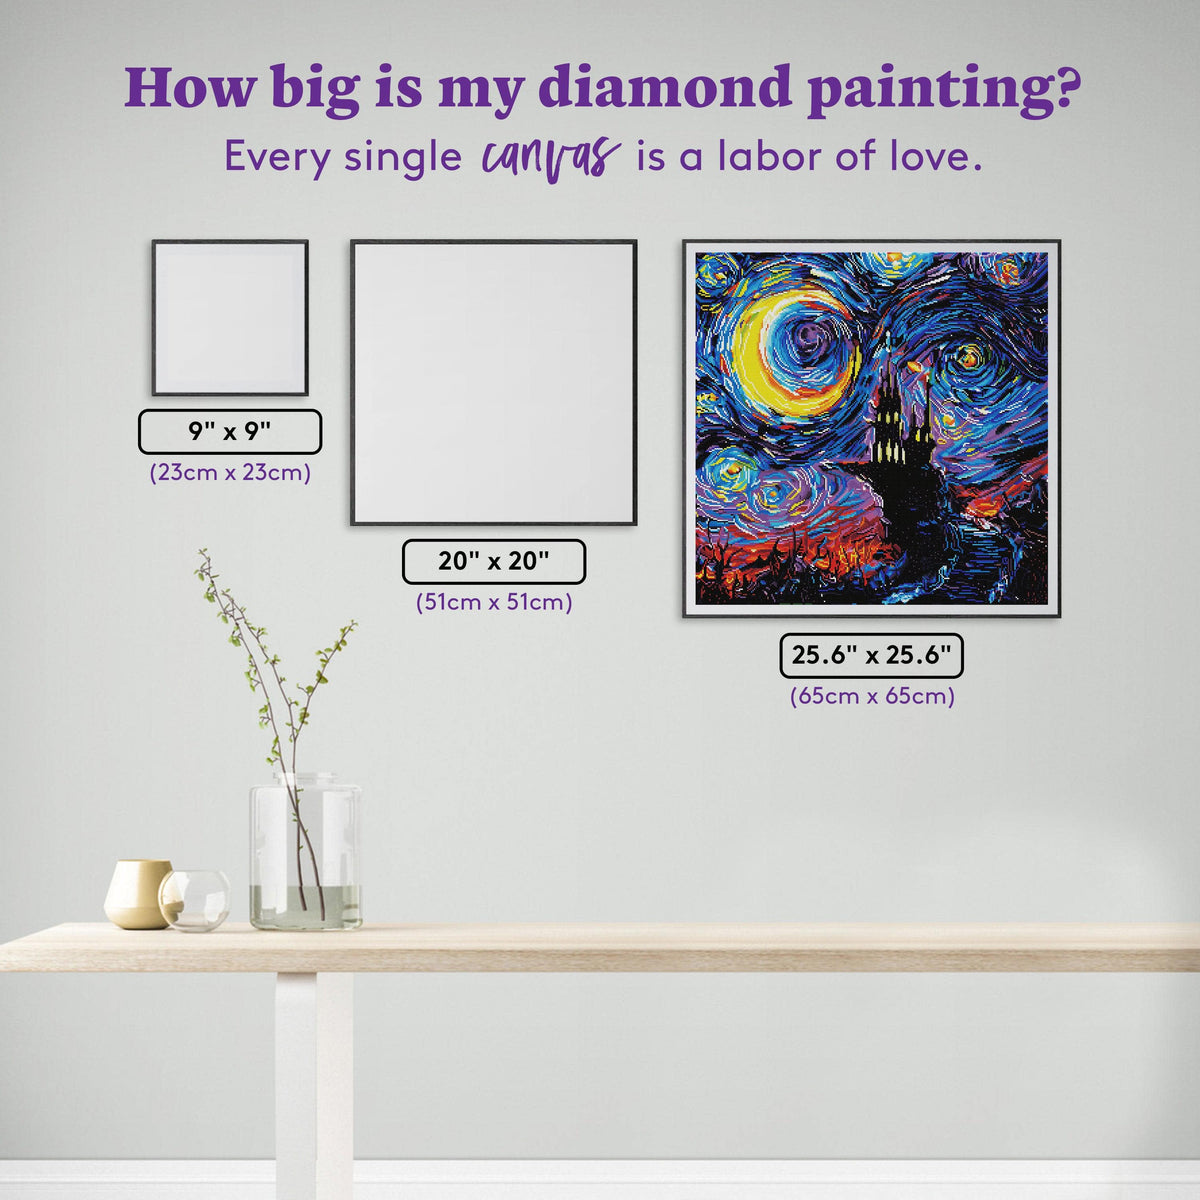 Diamond Painting The Haunting of van Gogh 25.6" x 25.6" (65cm x 65cm) / Square with 37 Colors including 4 ABs / 68,121